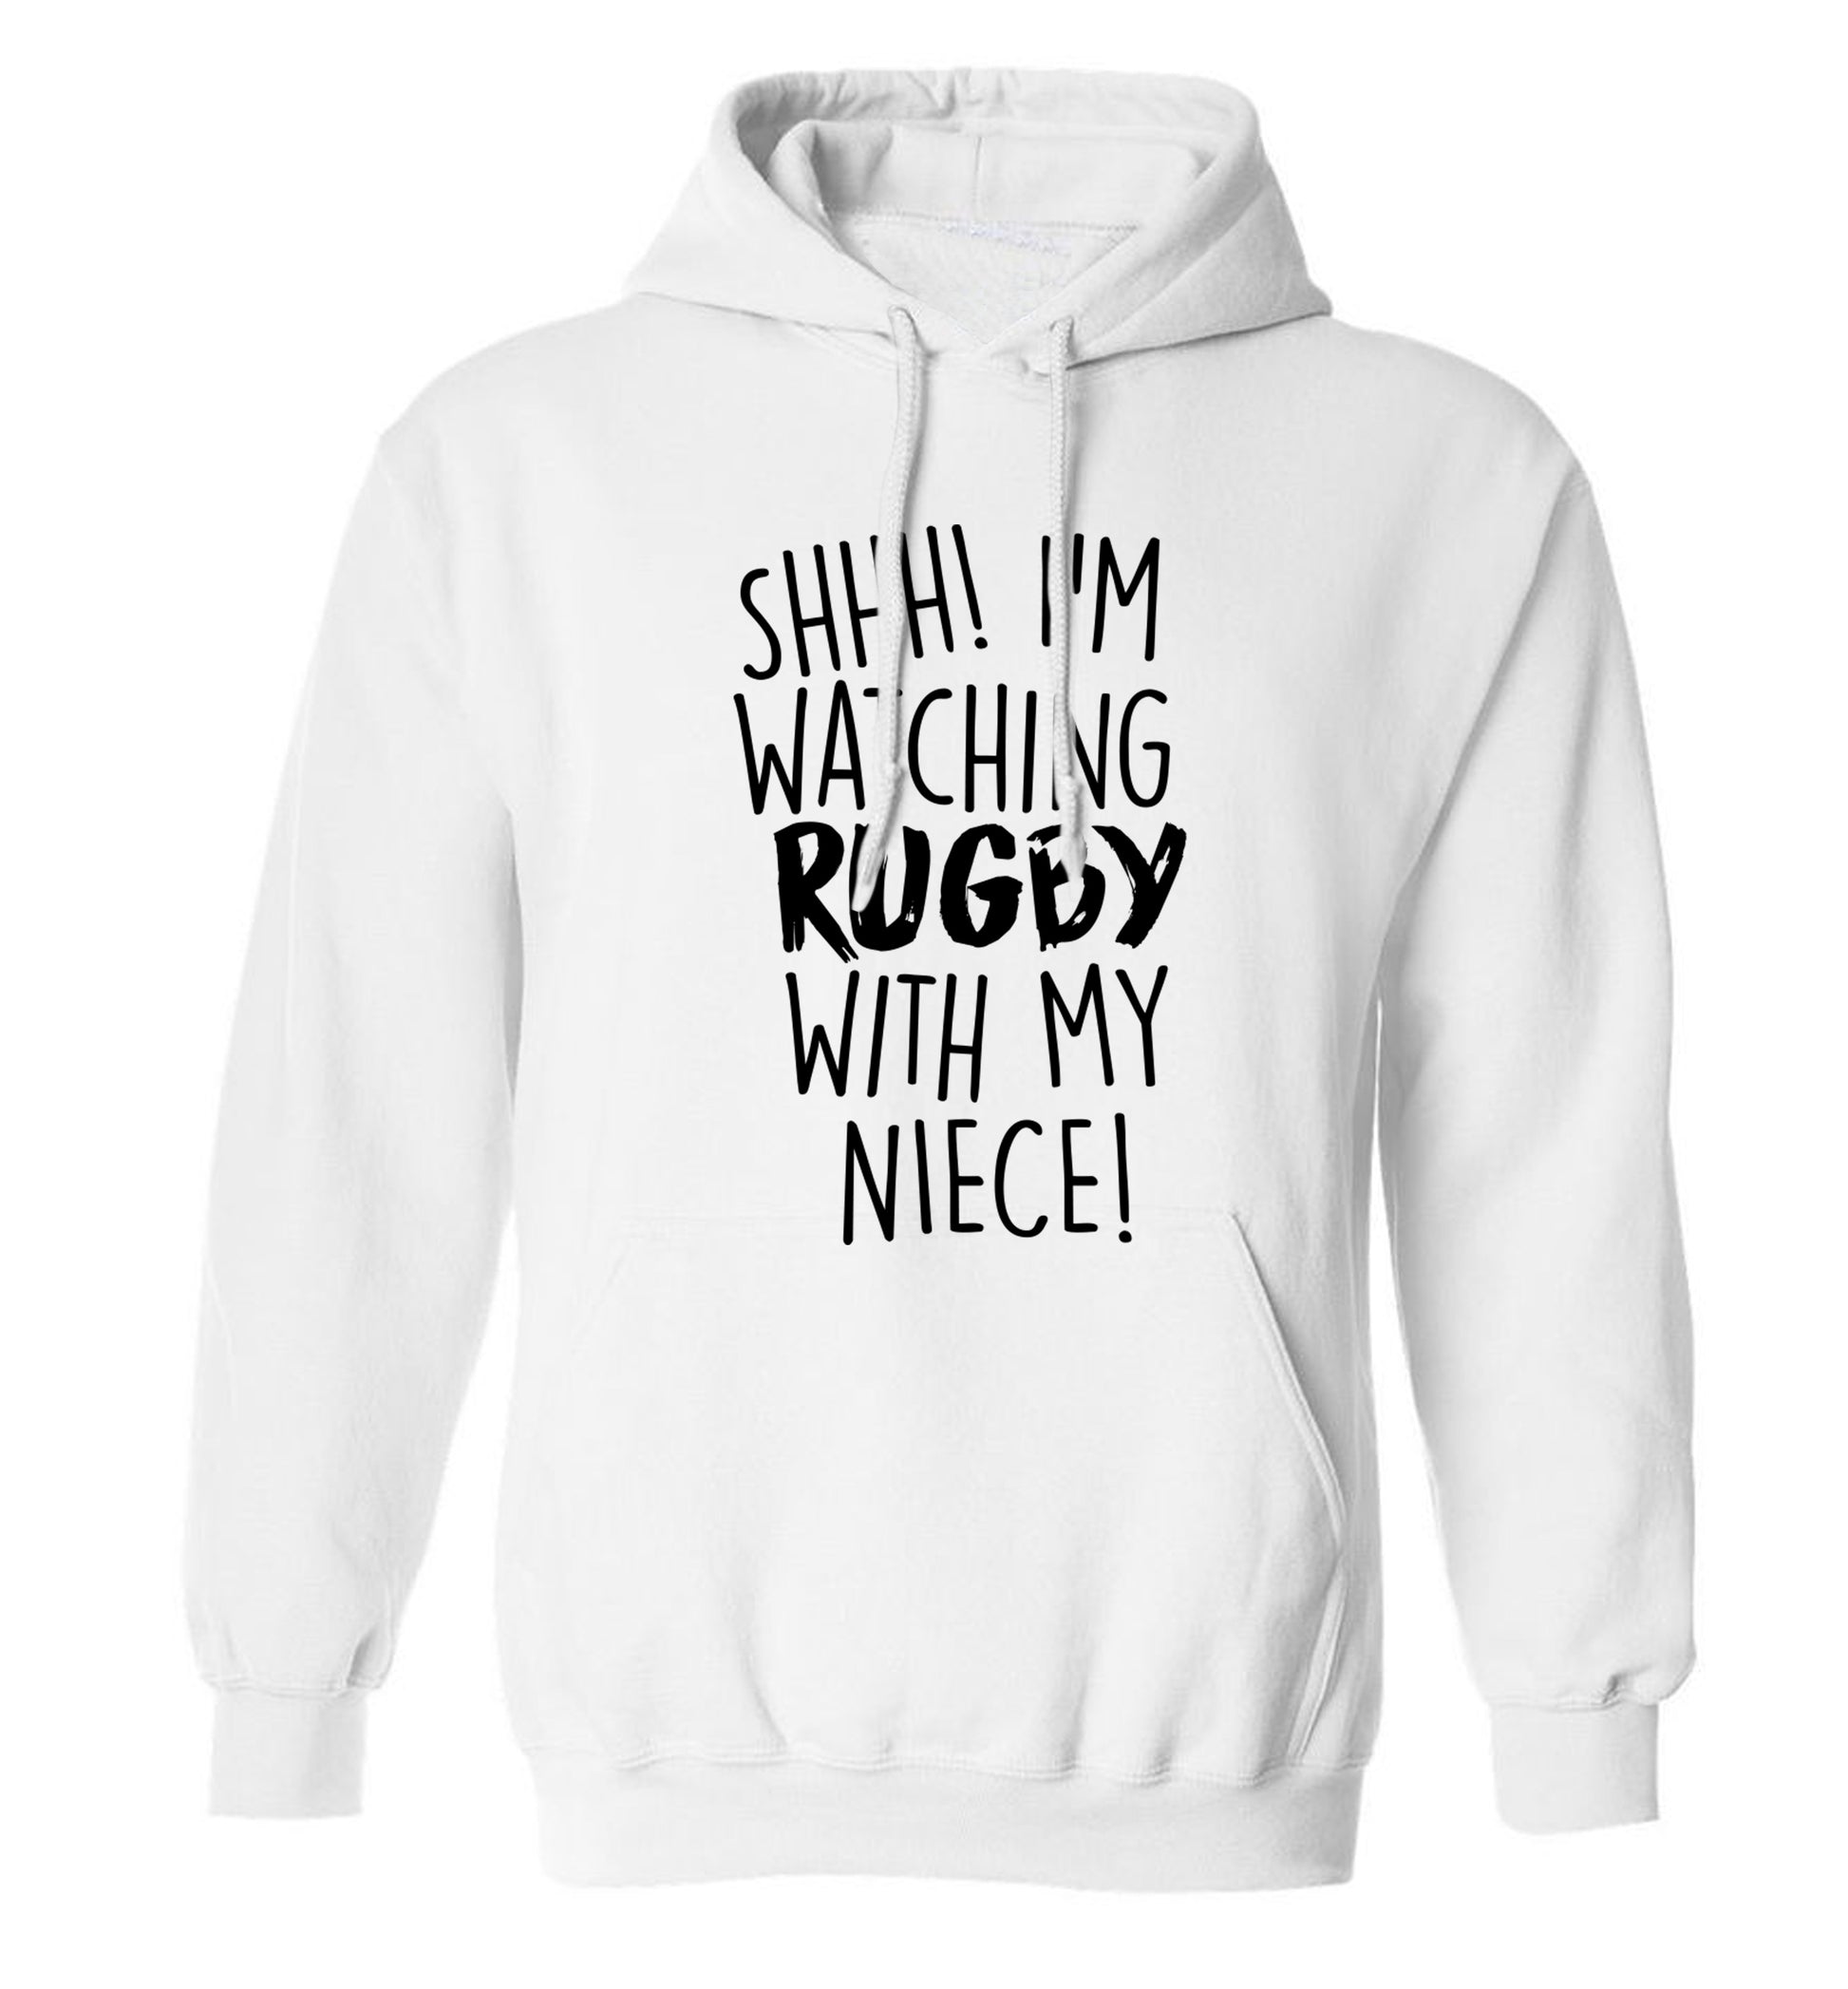 Shh.. I'm watching rugby with my niece adults unisex white hoodie 2XL